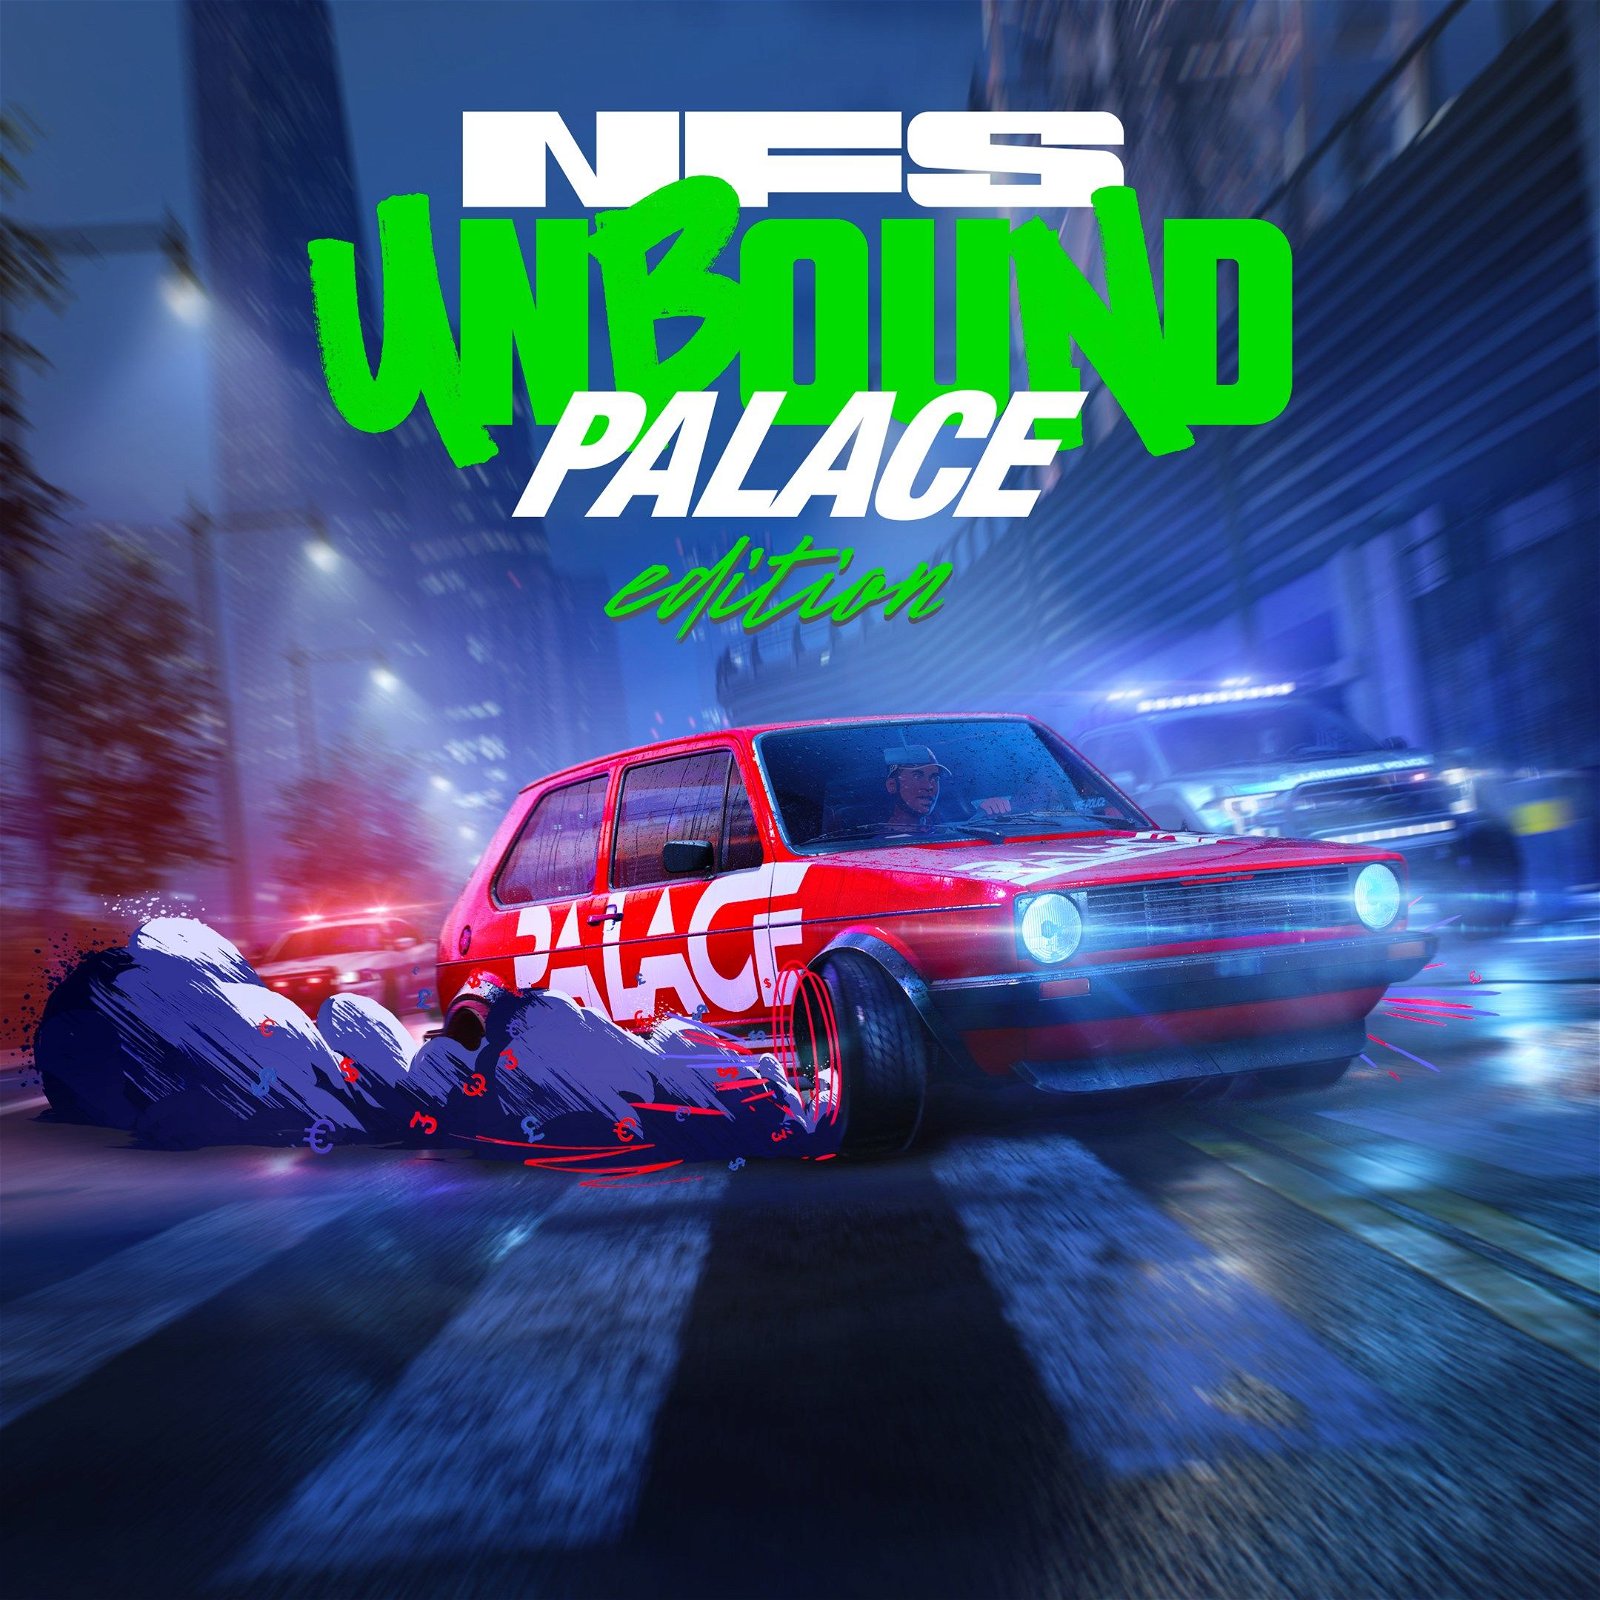 Image of Need for Speed Unbound Palace Edition